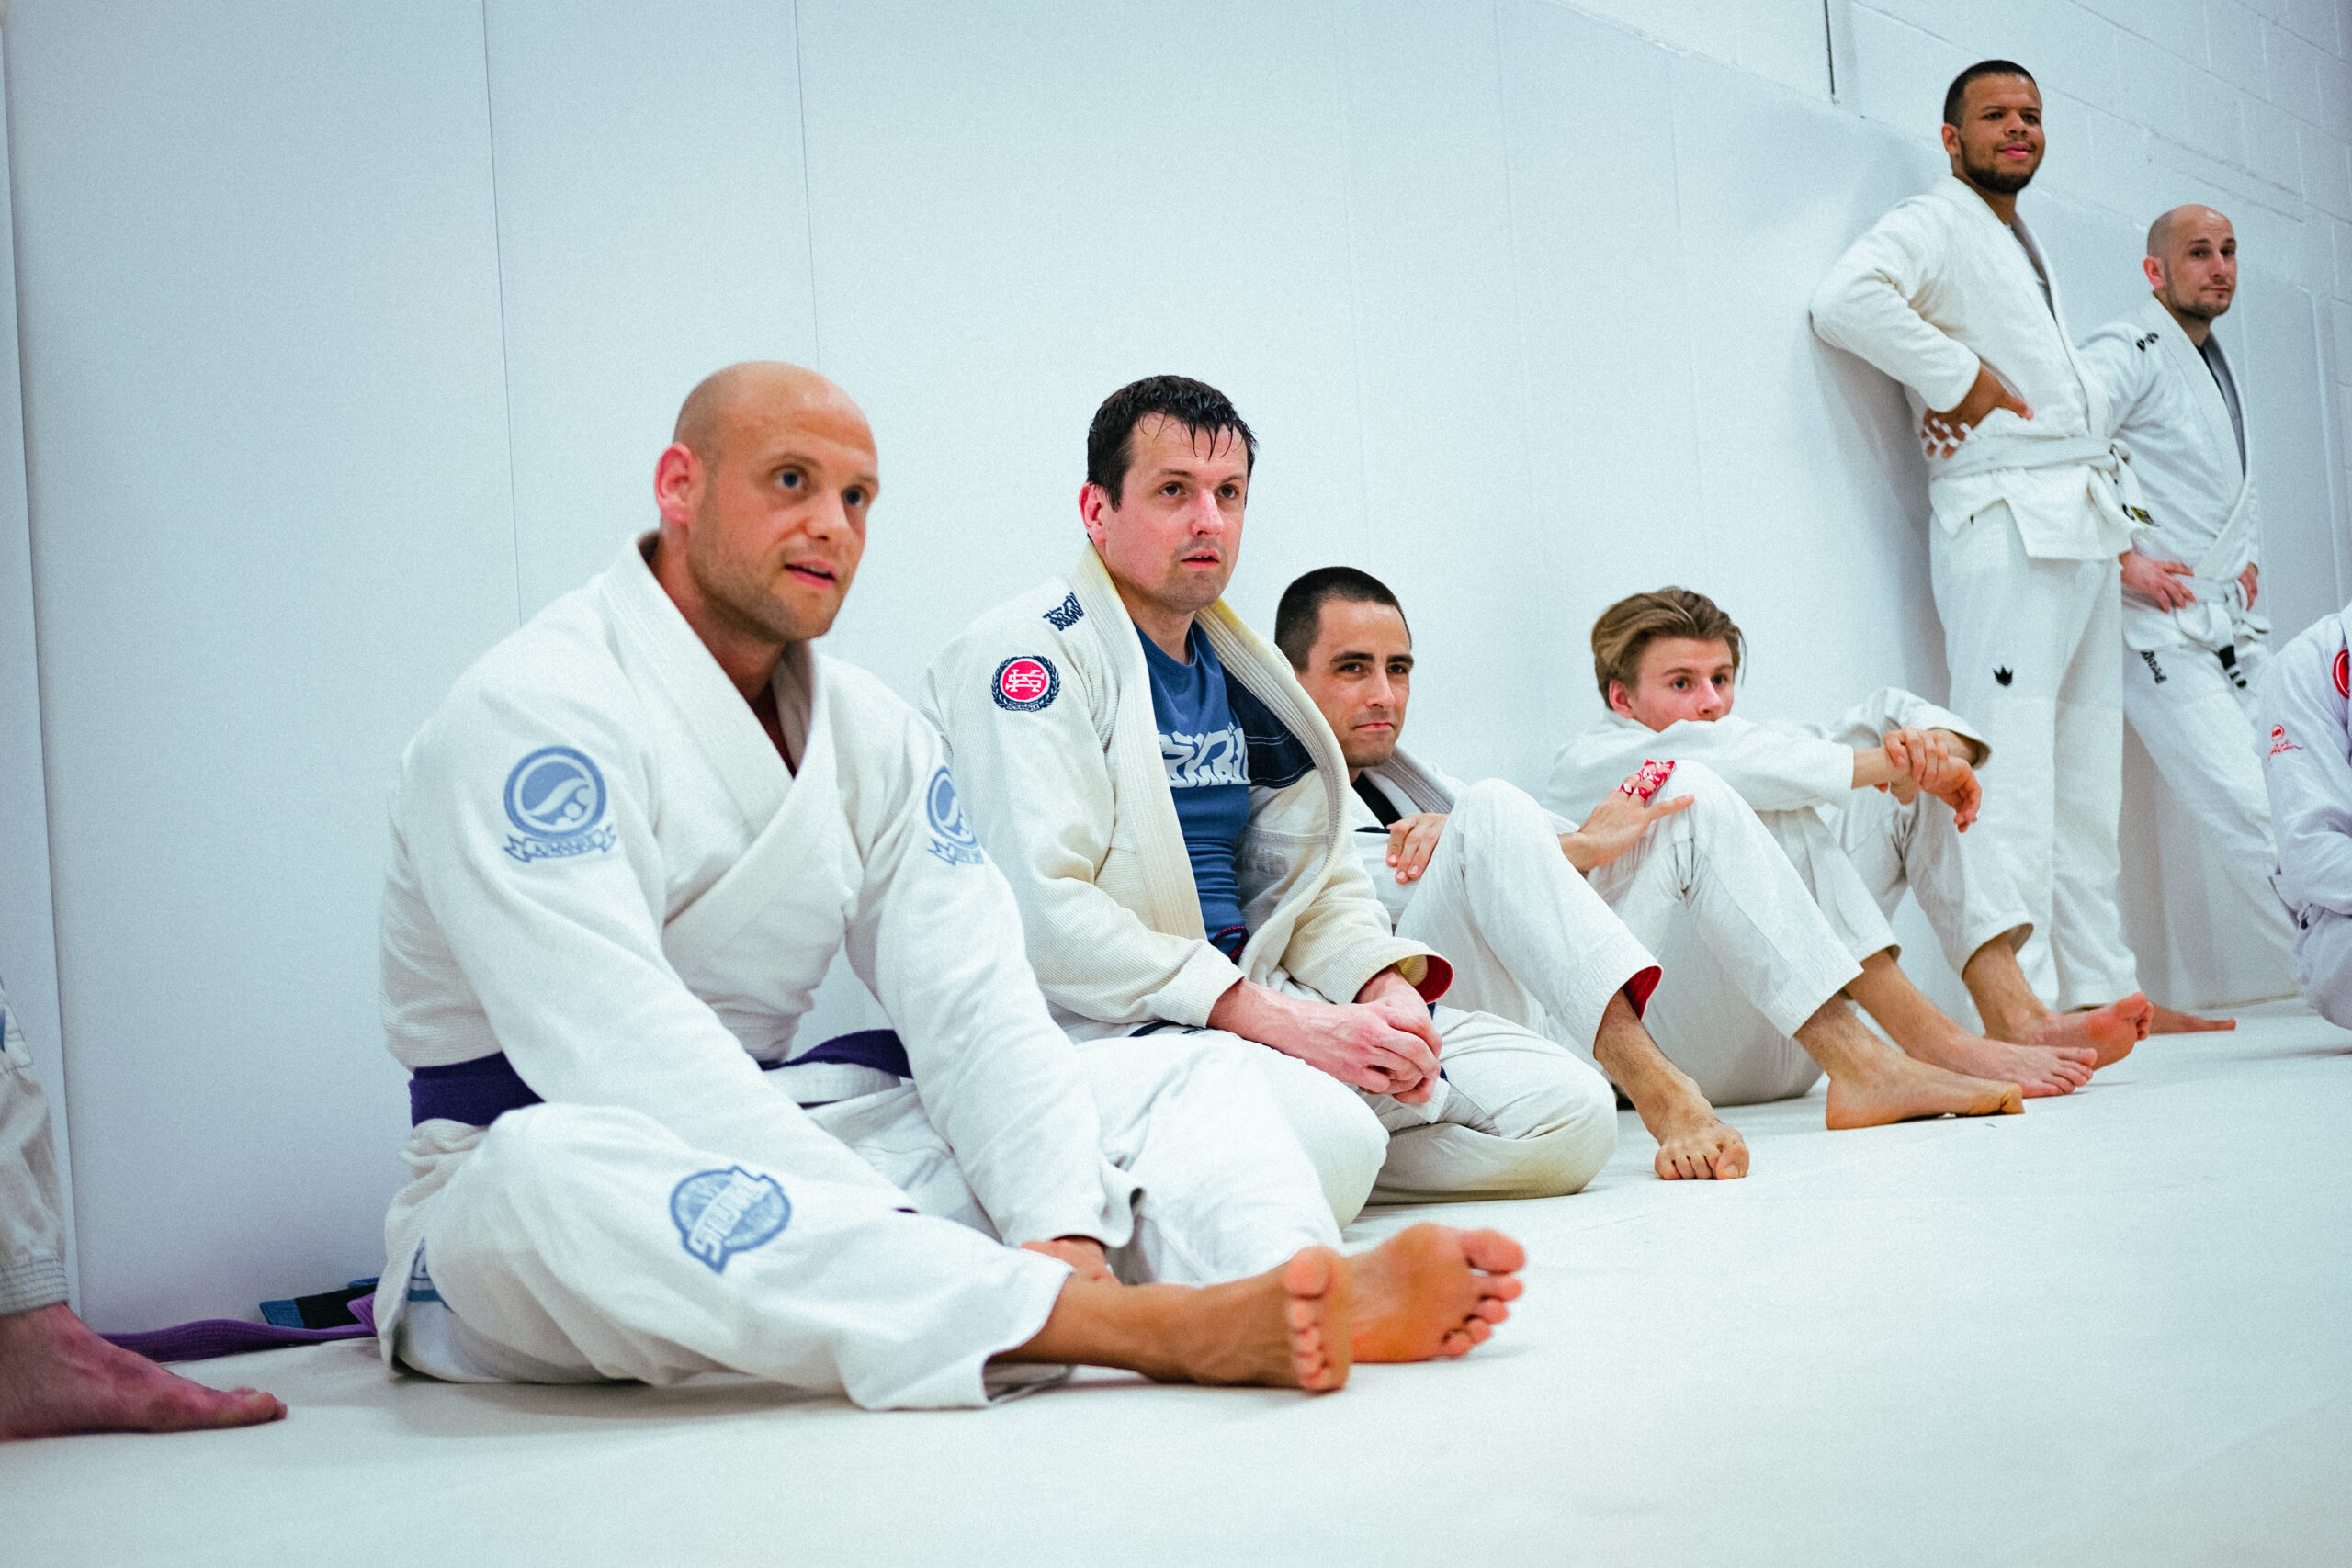 Learning during Anna Rodrigues seminar at Escapology BJJ in Cambridge